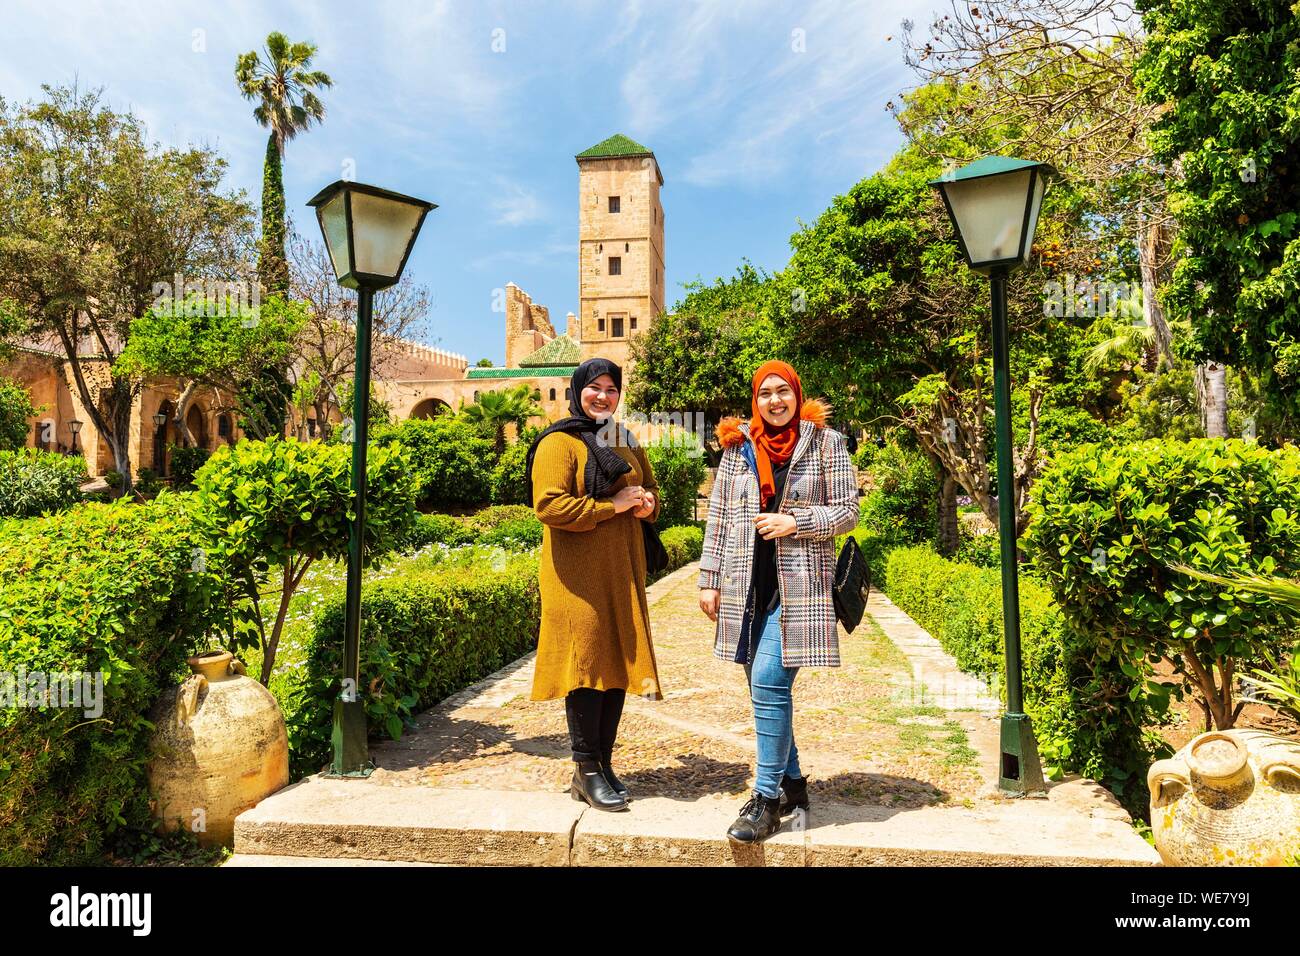 Morocco, Rabat, listed as World Heritage by UNESCO, Udayas kasbah (kasbah des Oudaïas), the andalusian garden, students Stock Photo